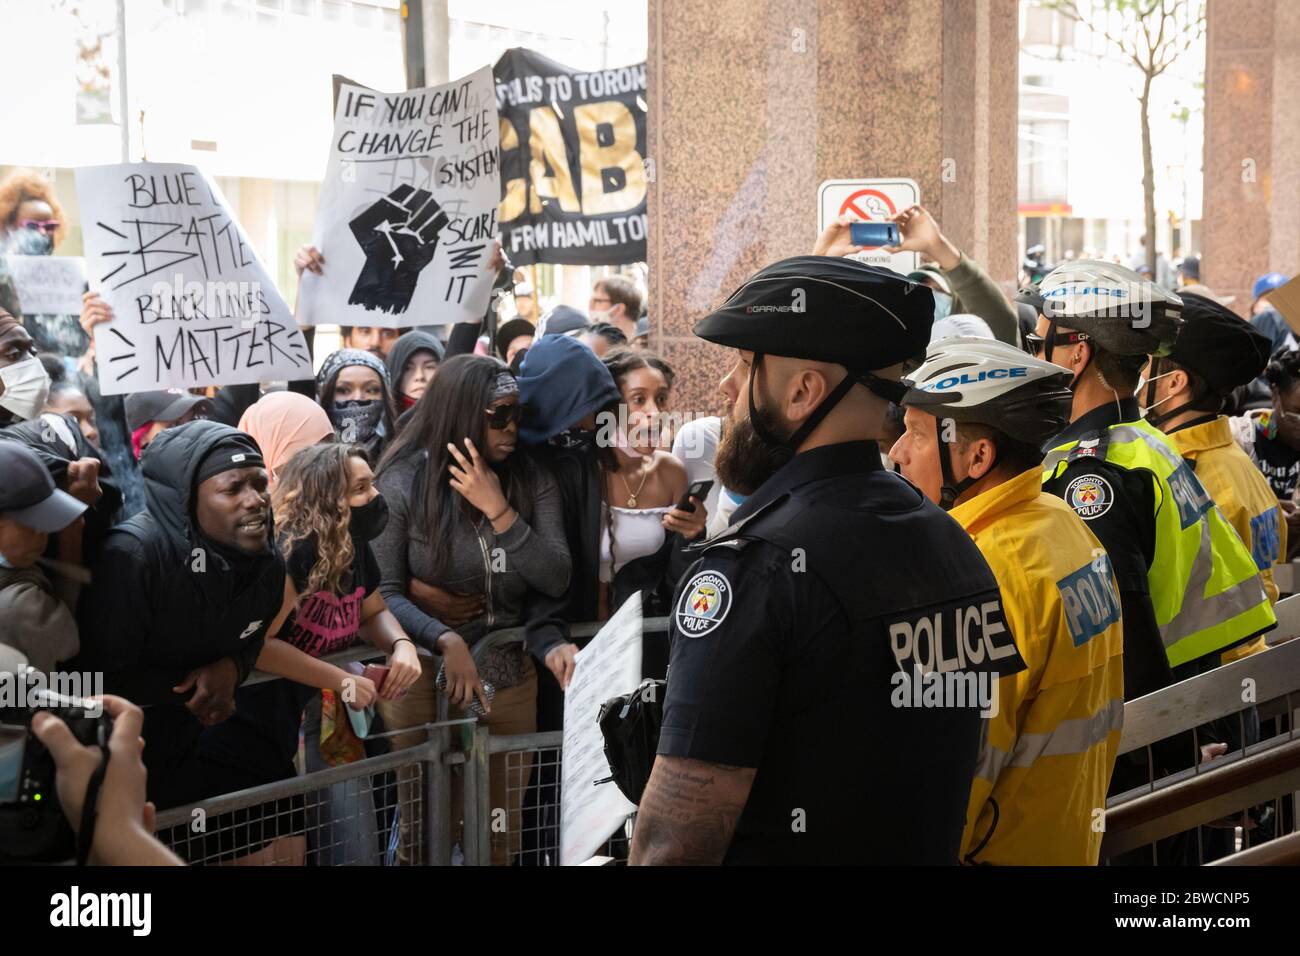 Protesters yell while police officers stand calmly at a 'Not Another Black Life' protest following the death of Regis Korchinski-Paquet in Toronto. Stock Photo